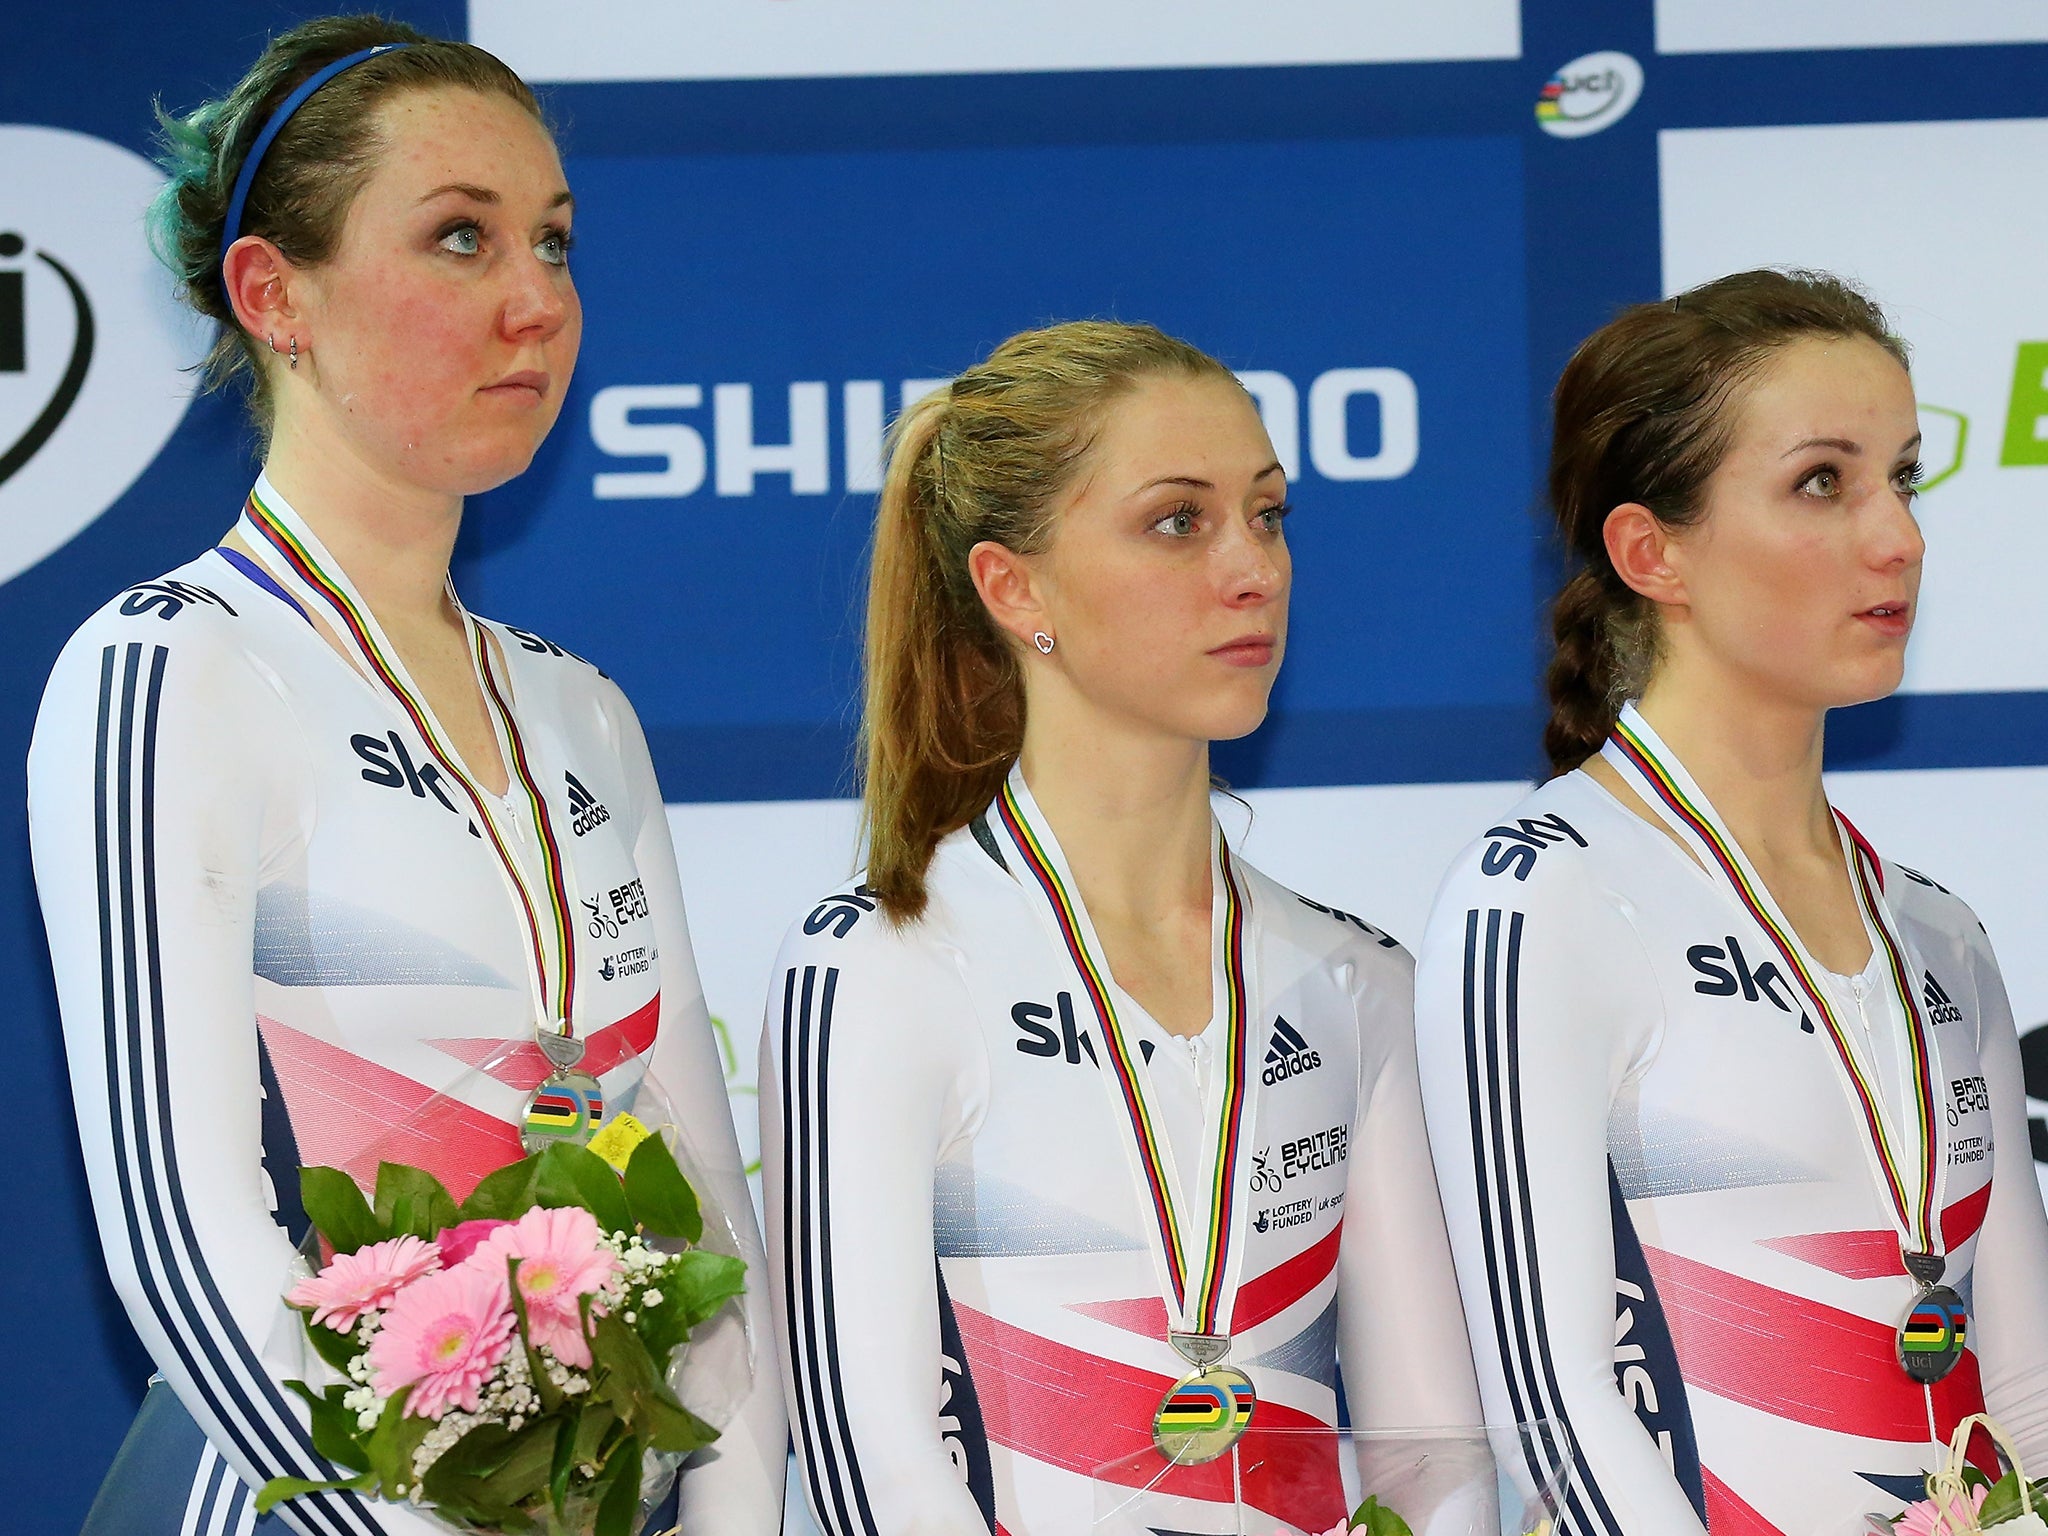 Laura Trott (centre) had previously been unbeaten in the event